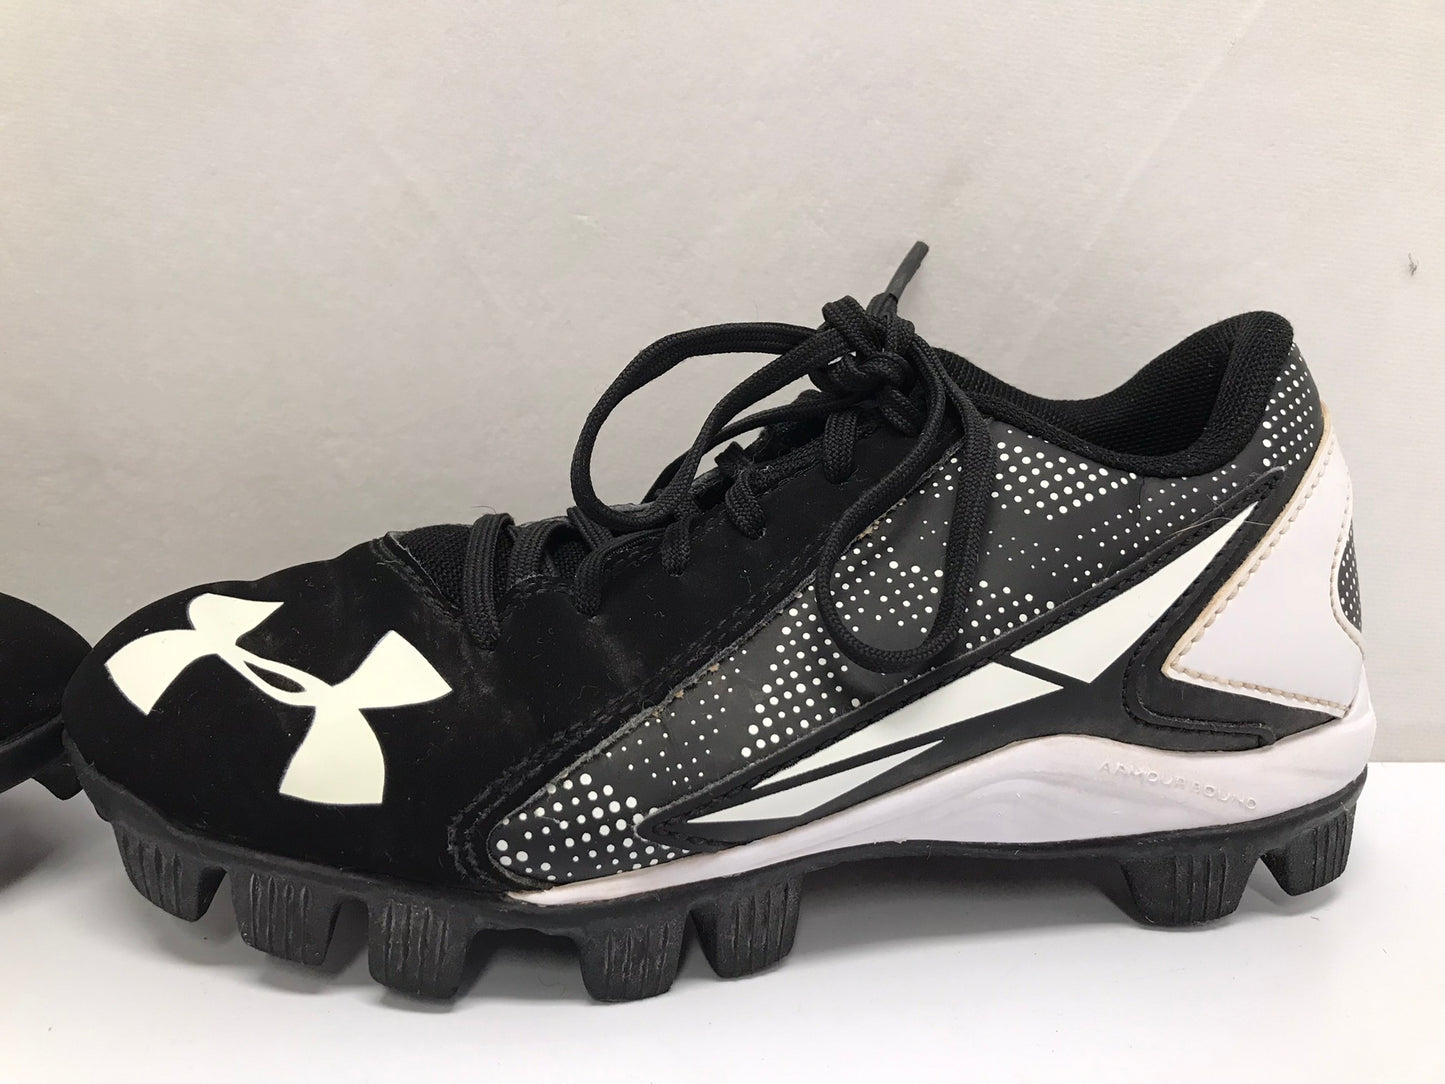 Baseball Shoes Cleats Child Size 2 Under Armour Black White Excellent